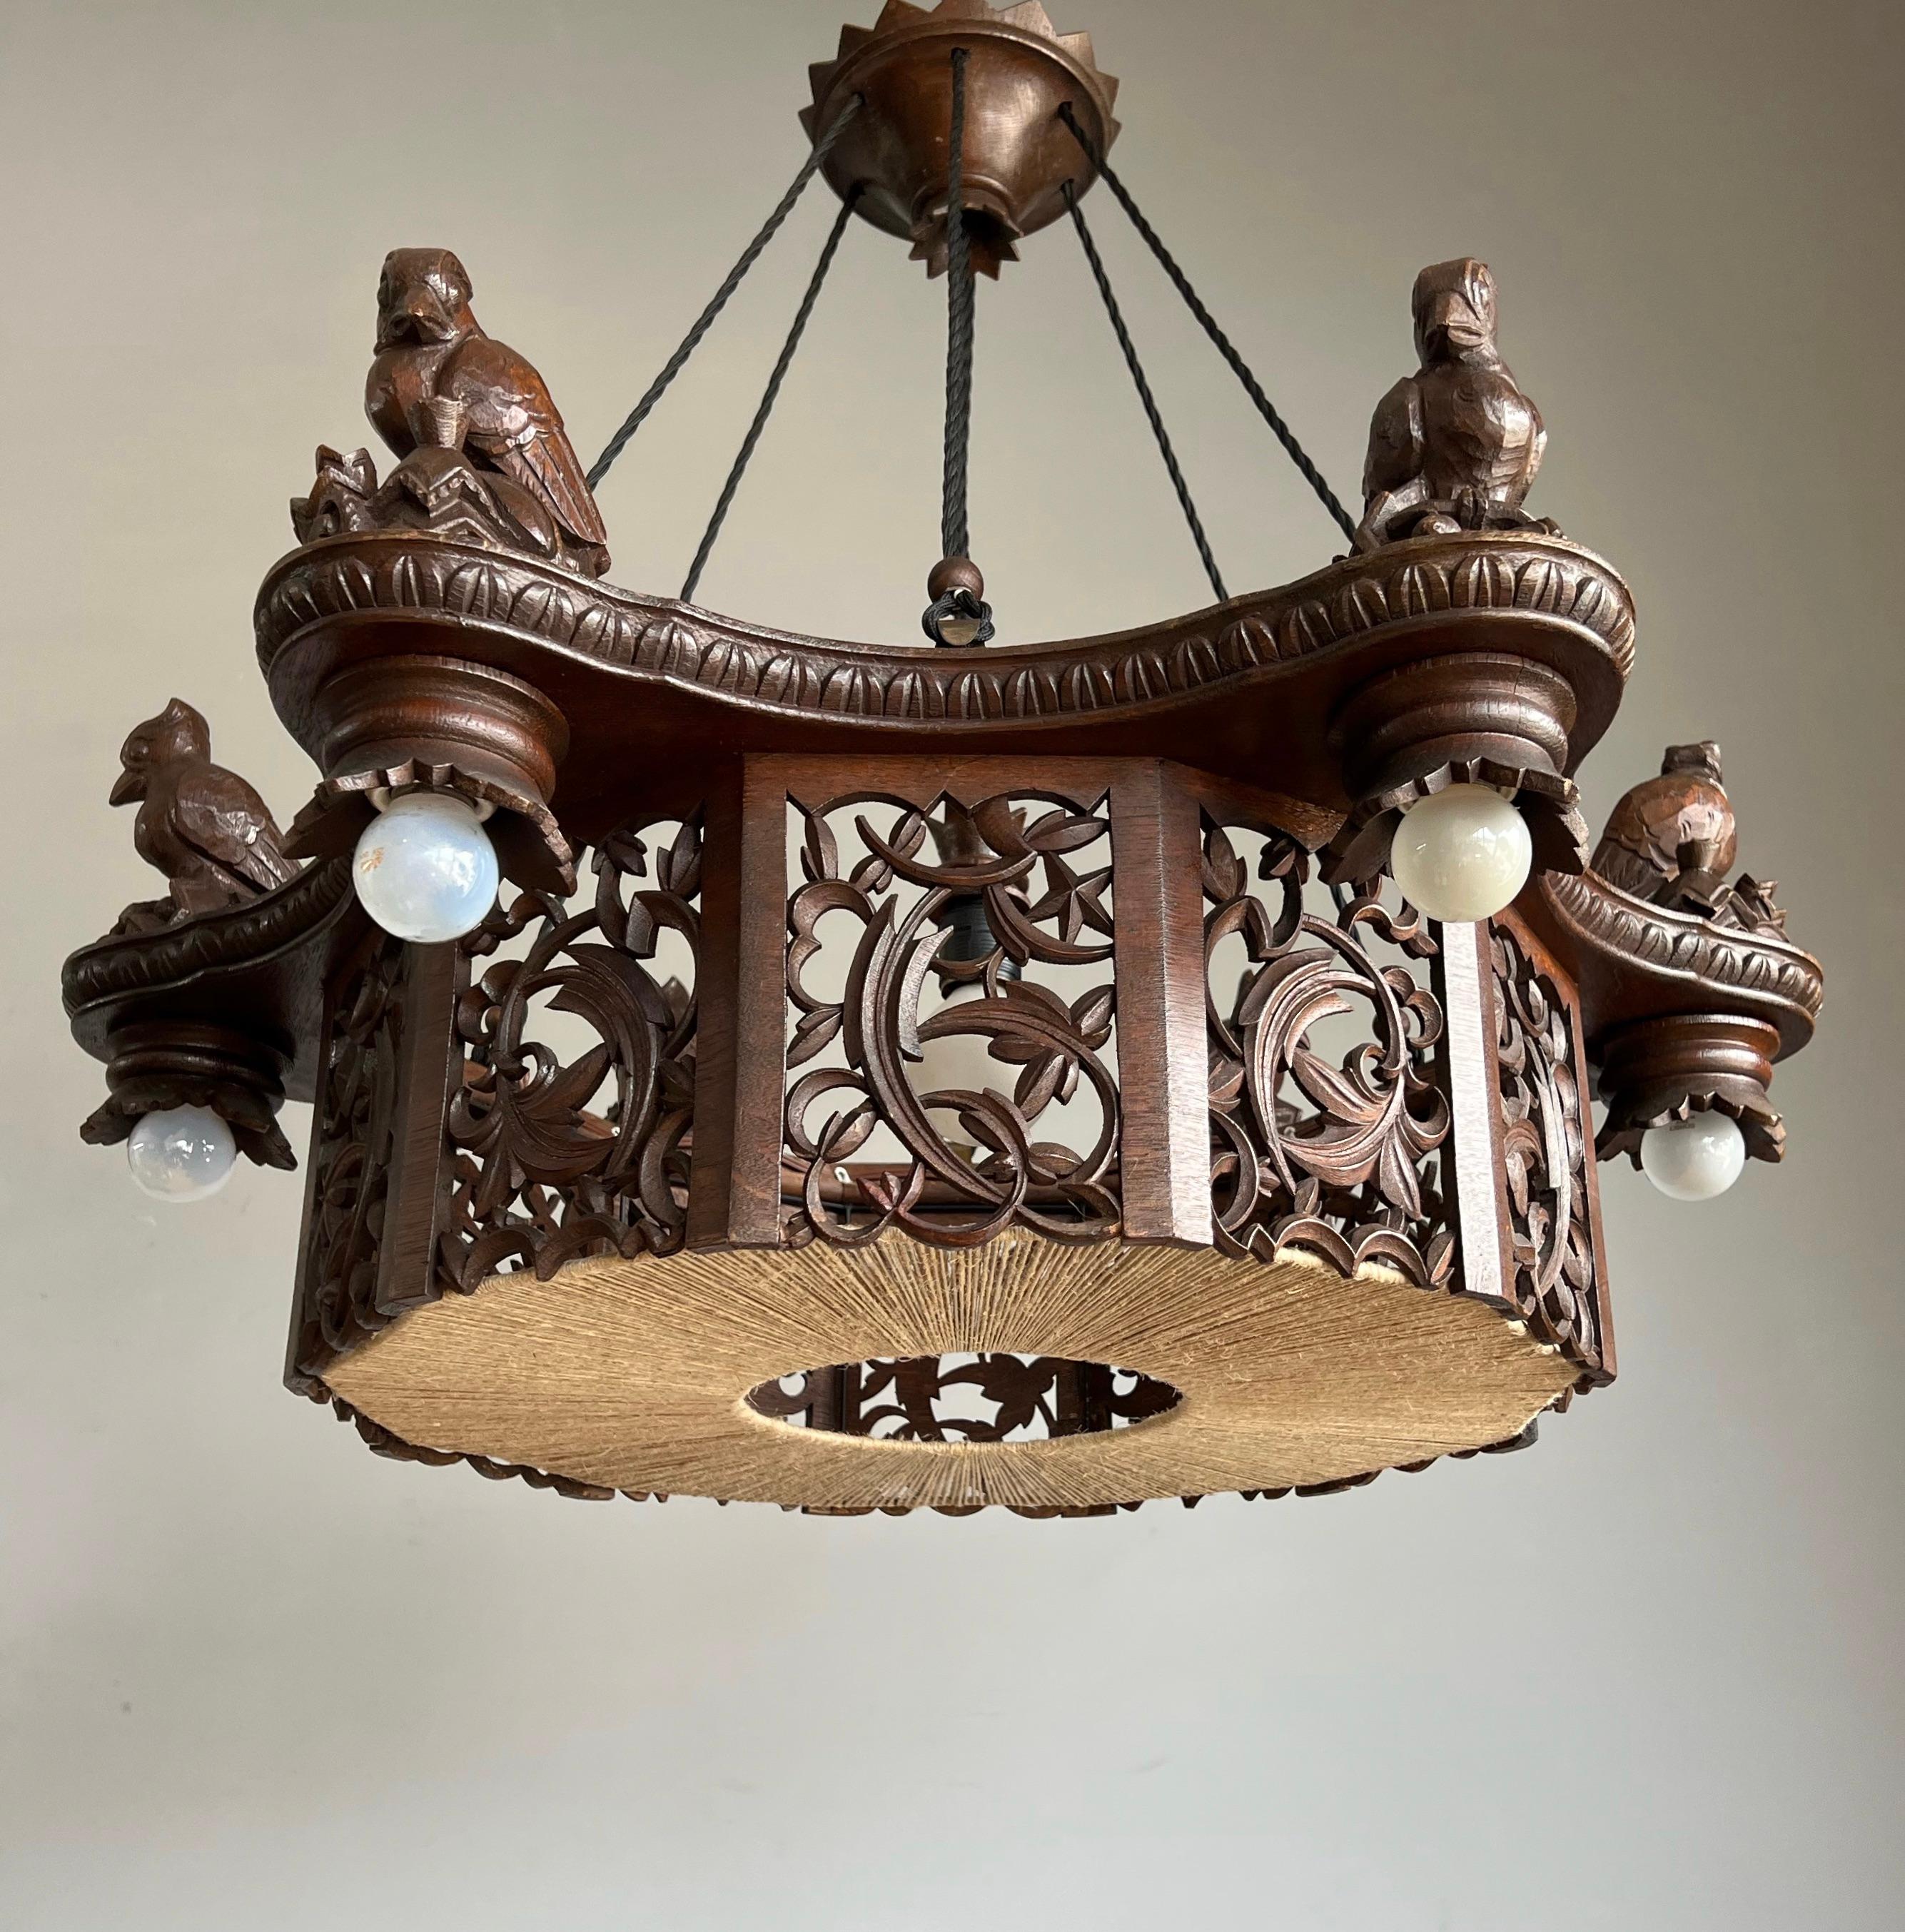 Antique and one of a kind, seven-light hand carved wooden stylish sculptural chandelier.

With early 20th century lighting being one of our specialities we always love finding pendants and chandeliers that we have never seen before and of which we